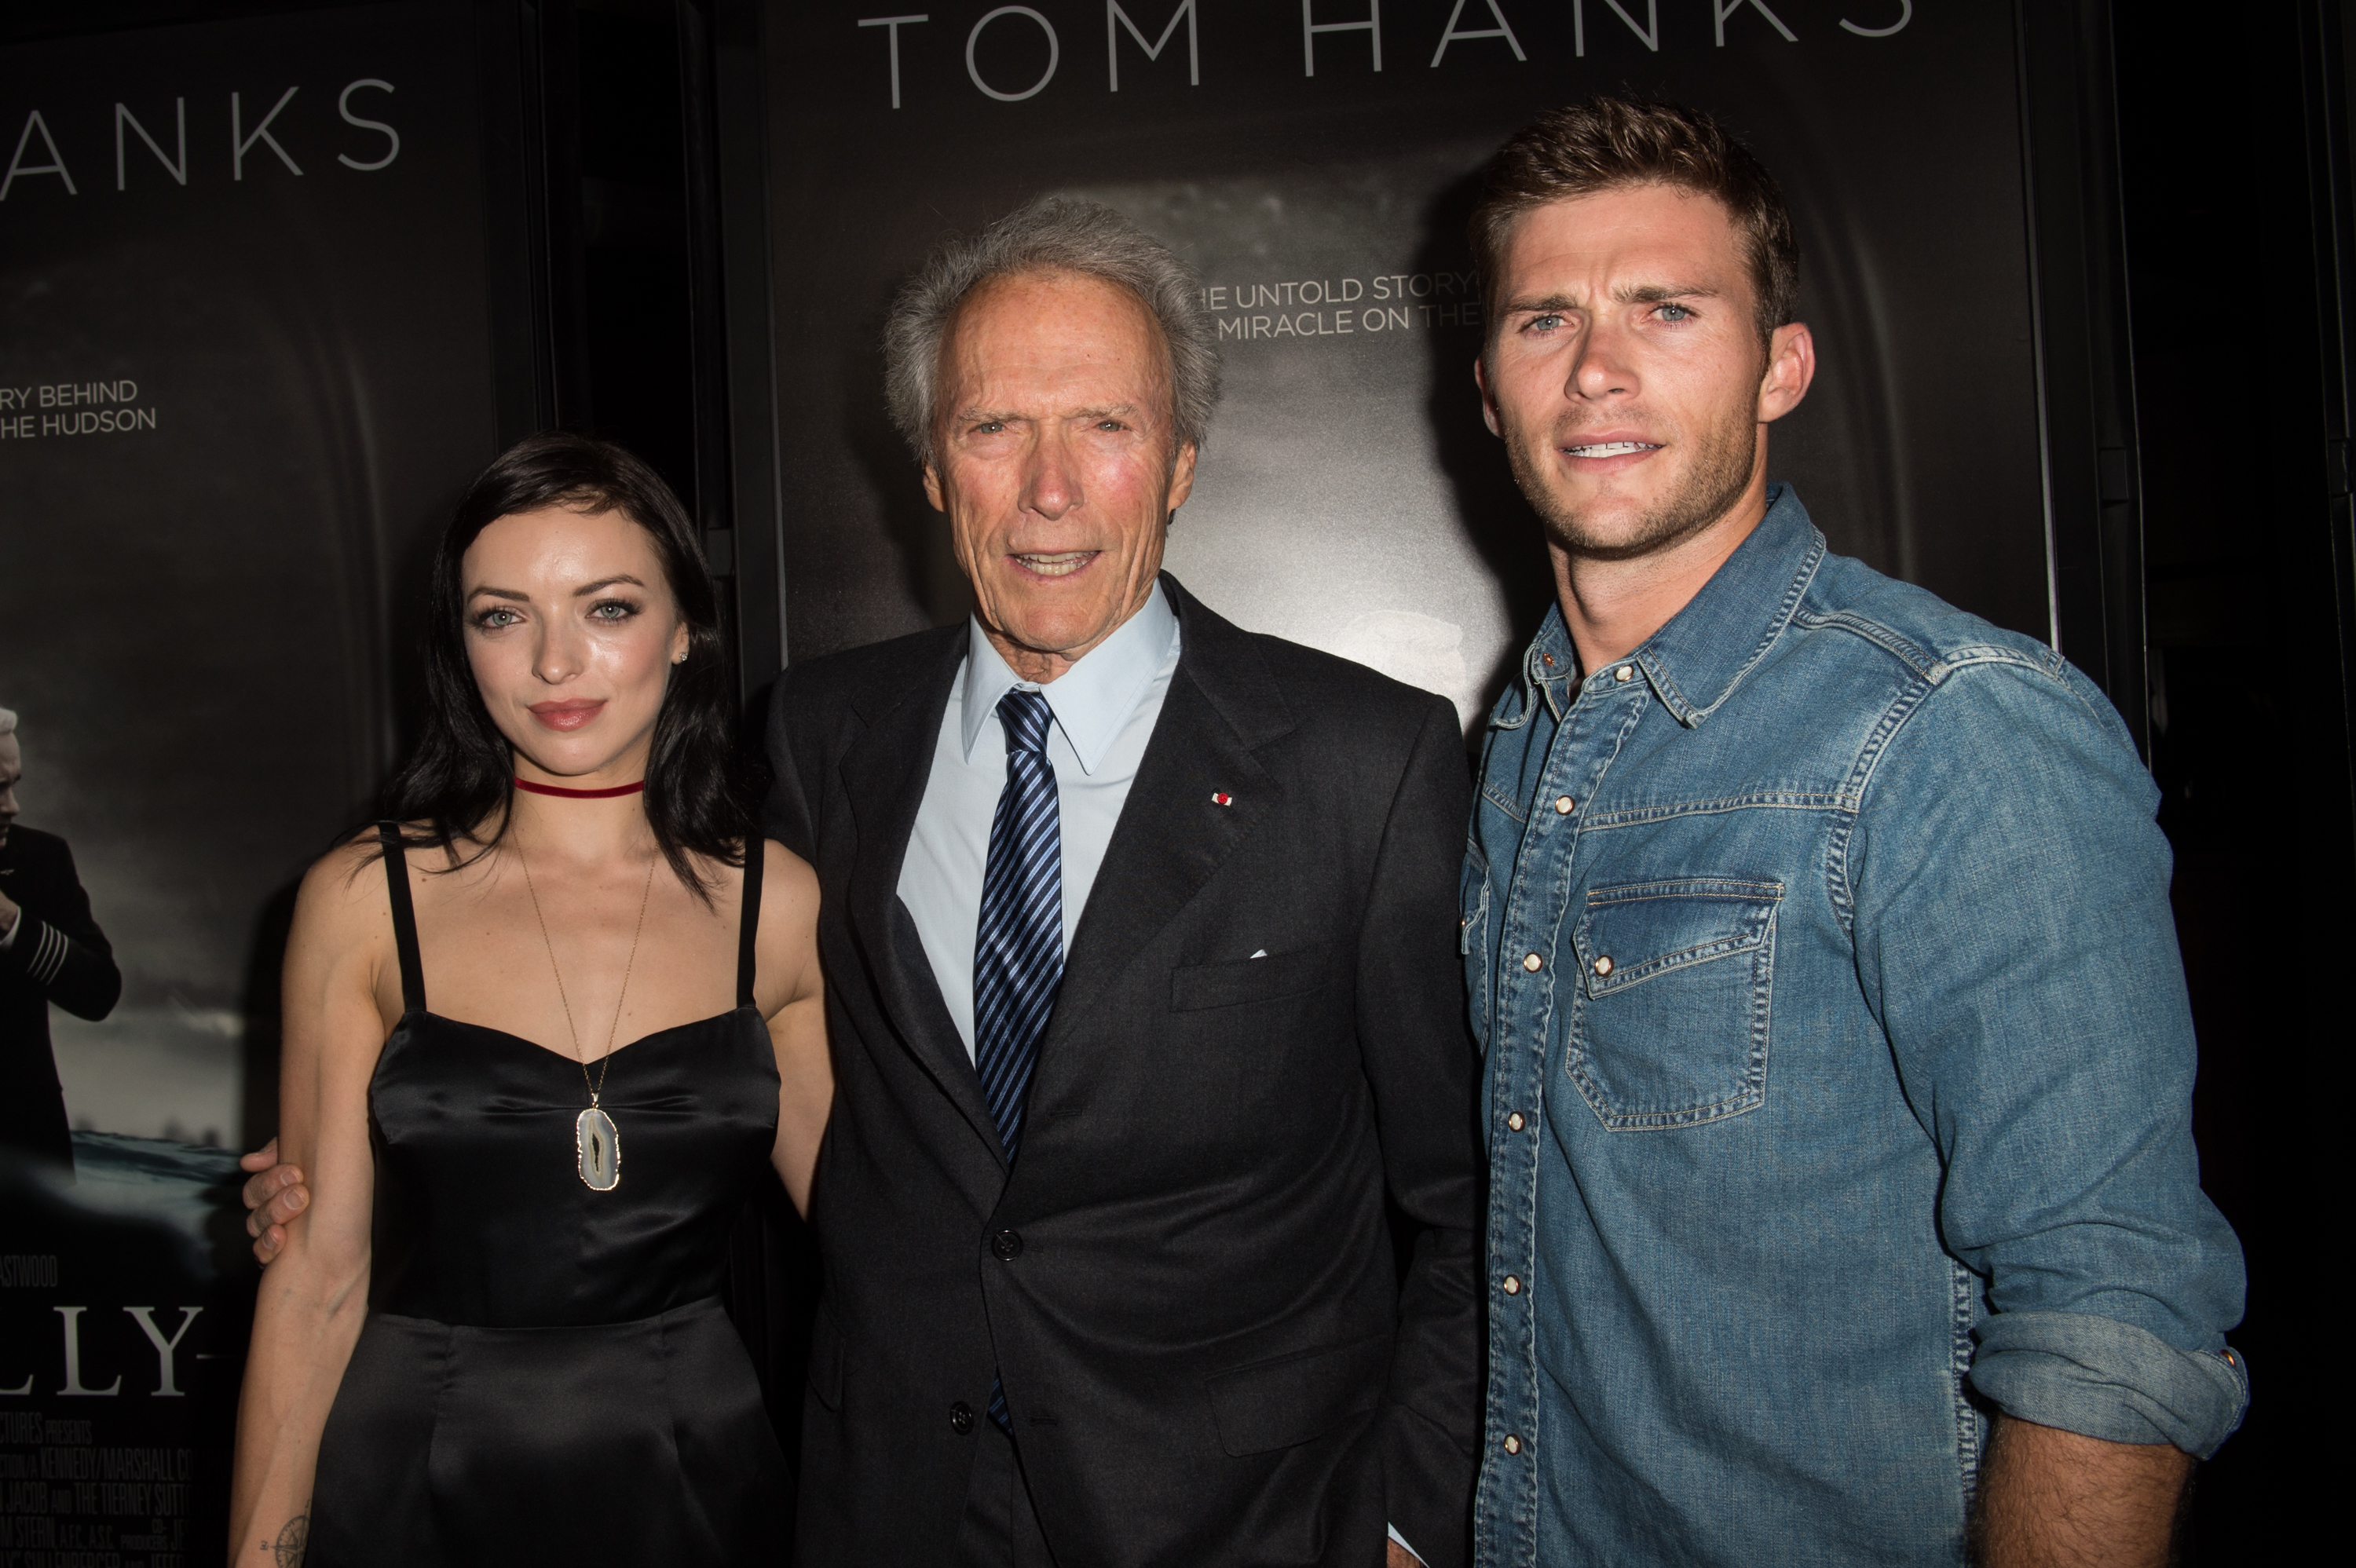 Clint Eastwood attends a screening of Warner Bros. Pictures’ Sully on September 8, 2016, in Los Angeles, California with his children, Francesca and Scott Eastwood